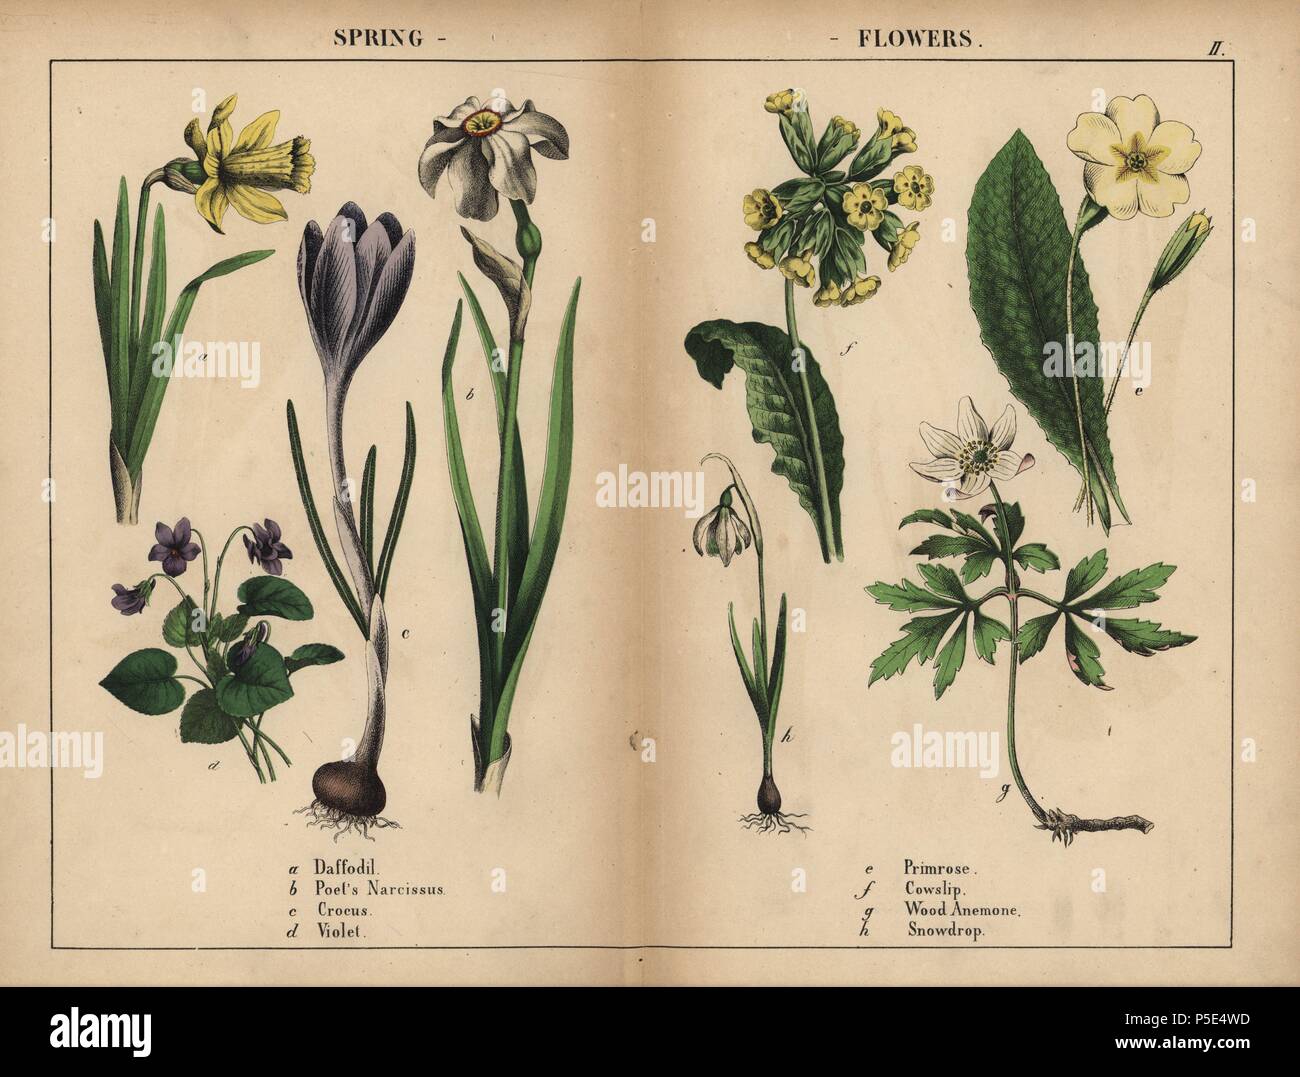 Yellow daffodil, white poet's narcissus, purple crocus, purple violet, yellow primrose, yellow cowslip, white wood anemone, and white snowdrop.. . Chromolithograph from 'The Instructive Picturebook, or Lessons from the Vegetable World,' [Charlotte Mary Yonge], Edinburgh, 1858. Stock Photo